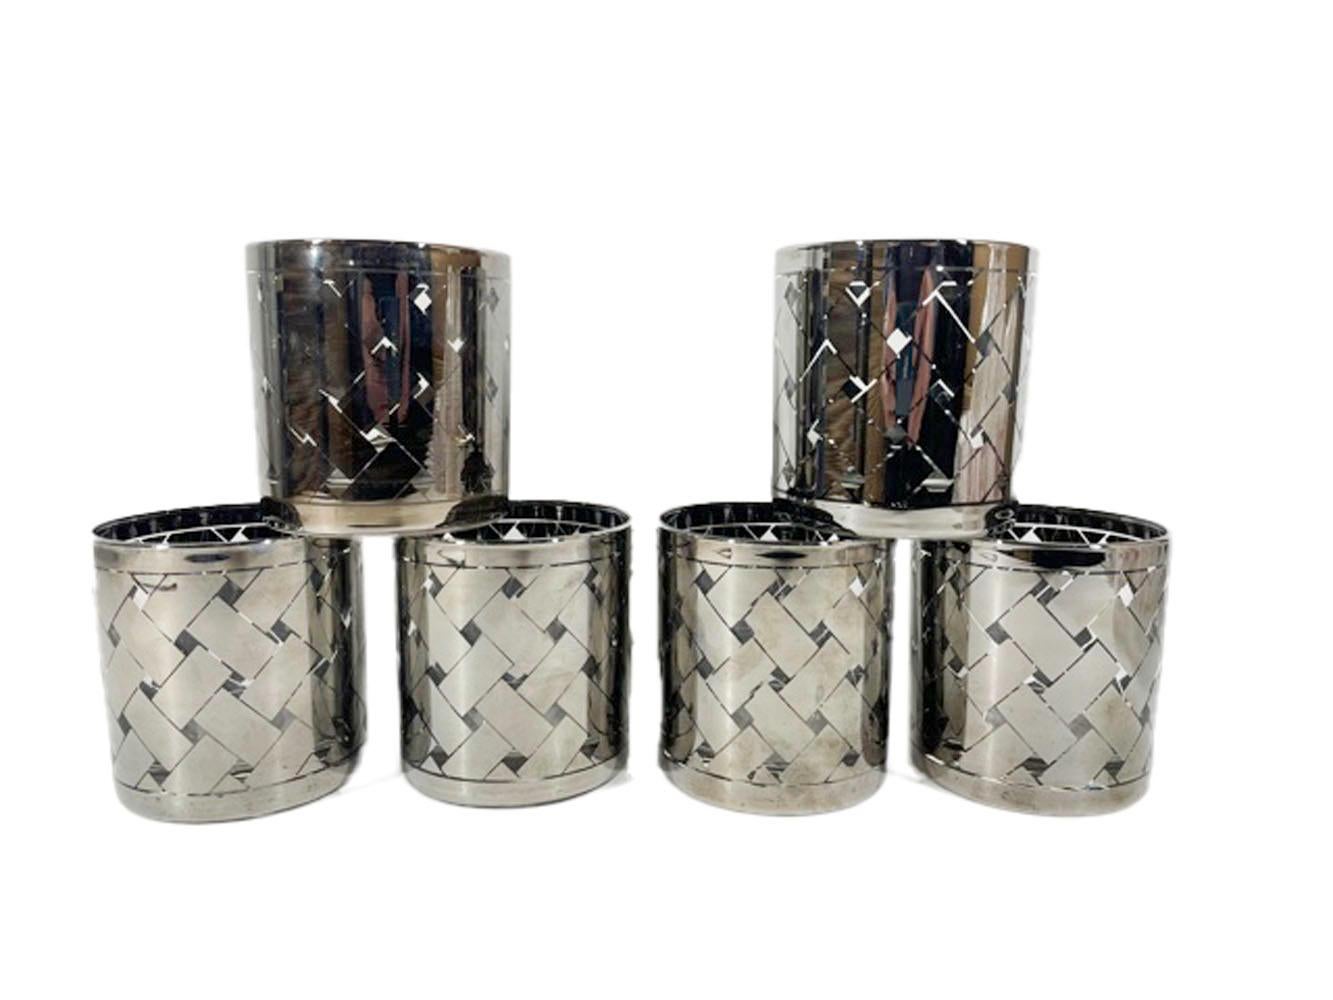 Six Mid-Century Modern Rocks Glasses Decorated in a Silver Basketweave Pattern In Good Condition For Sale In Nantucket, MA